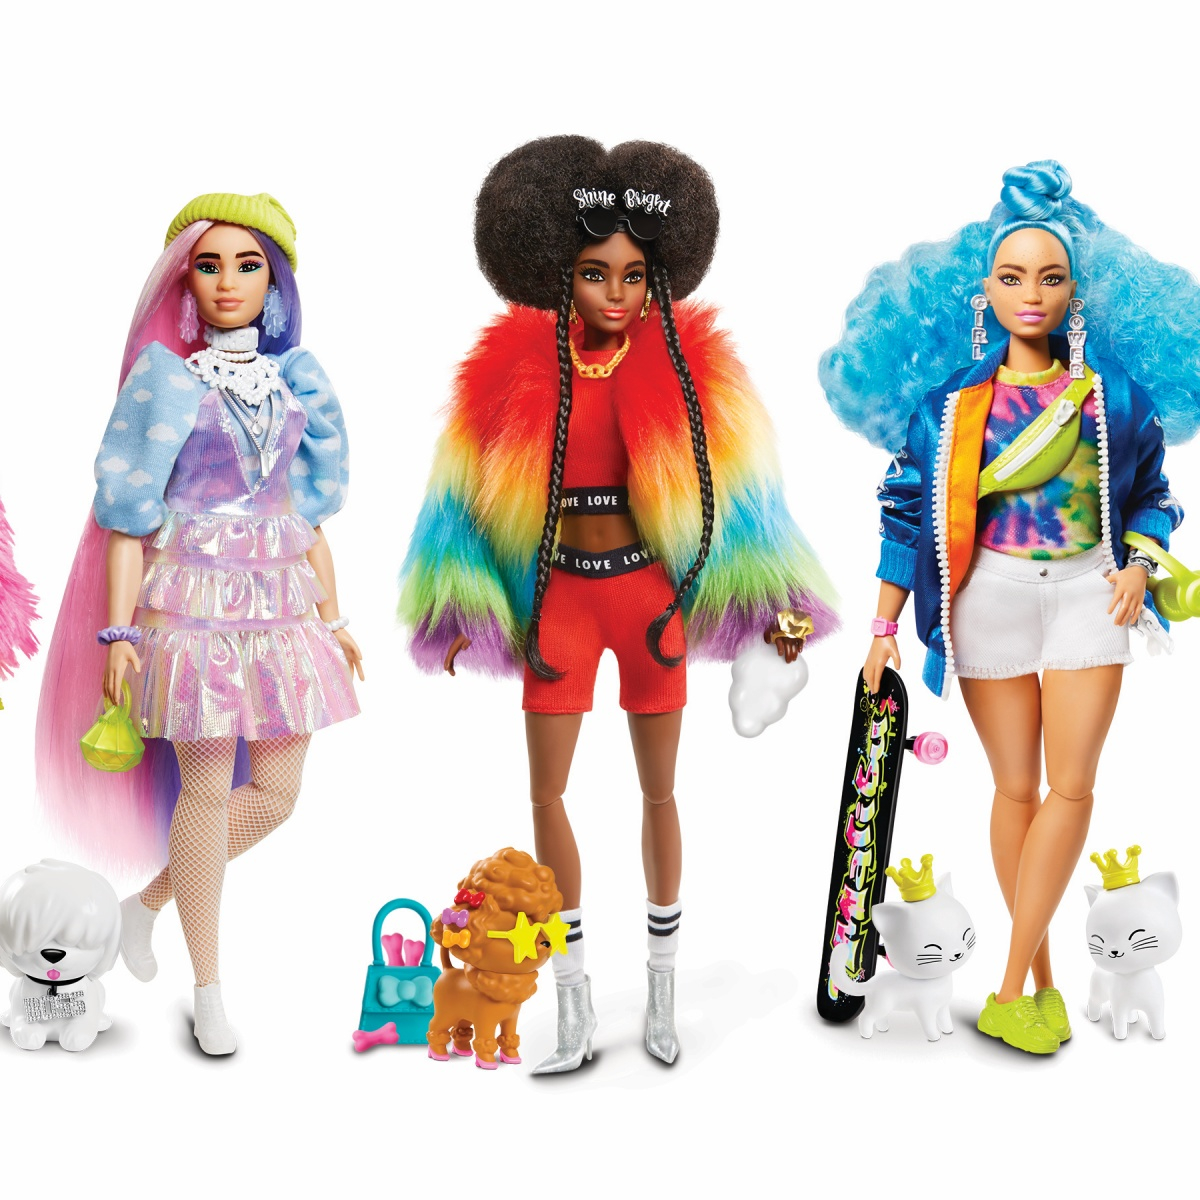 Barbie's New Dolls Are So Extra—and Perfect for Holiday Gifts